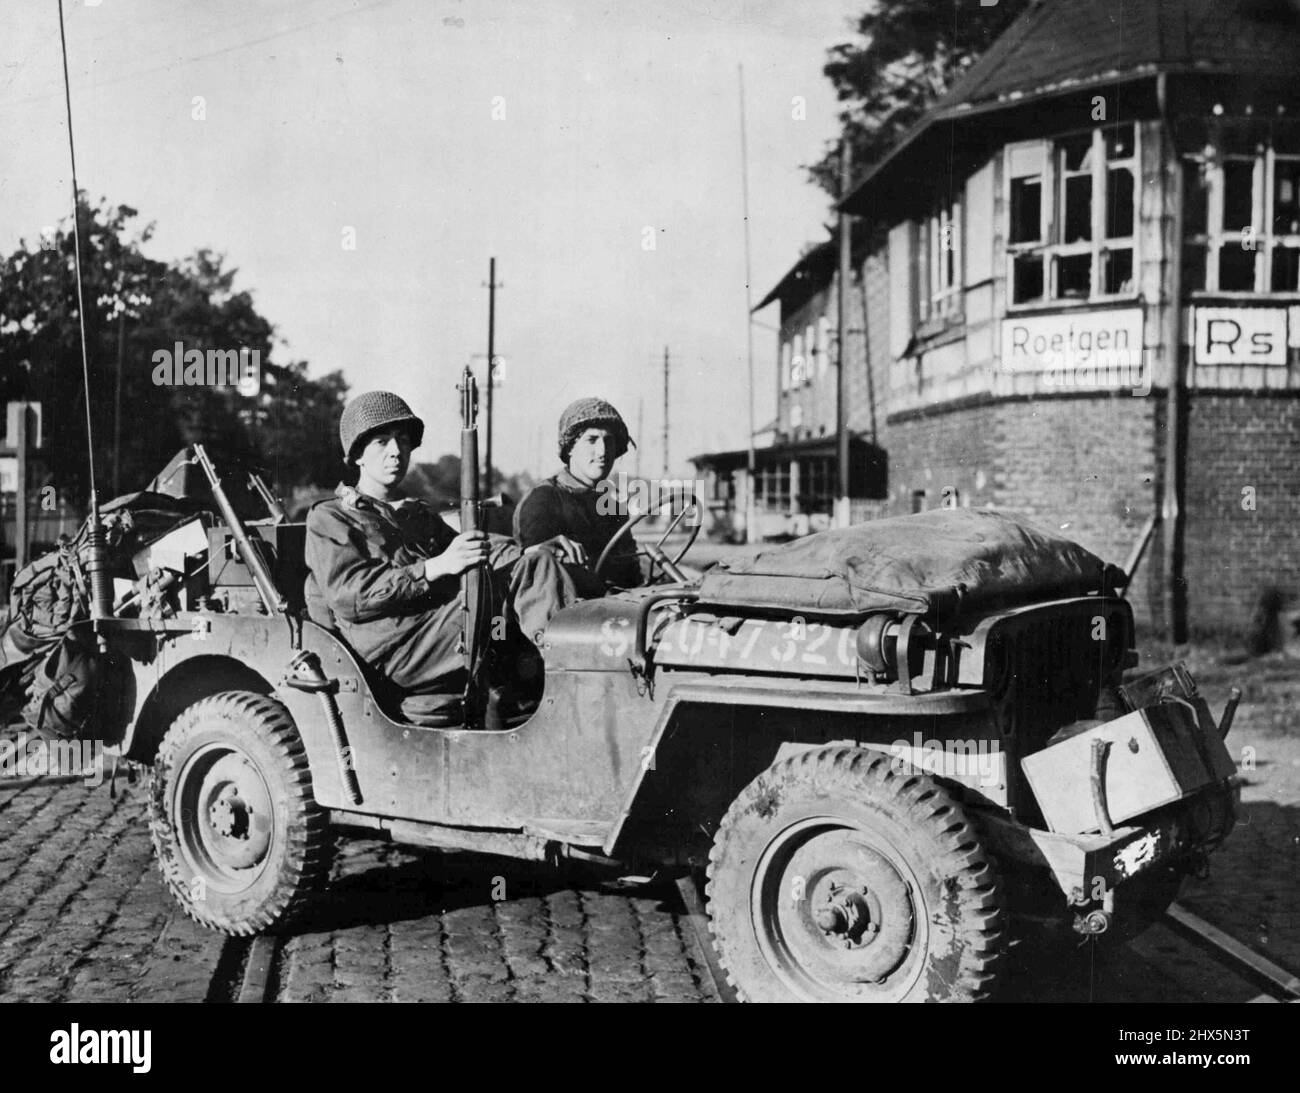 Americans Pierce Siegfried Line in Roetgen Area: The first American jeep to cross the German frontier stops at the railroad station in Roetgen September 14, 1944. American forces blasted a path through the outer concrete and steel fortifications of the Siegfried line in the vicinity of the German city a few miles inside the border. October 23, 1944. (Photo byU.S. Signal Corps Photo). Stock Photo